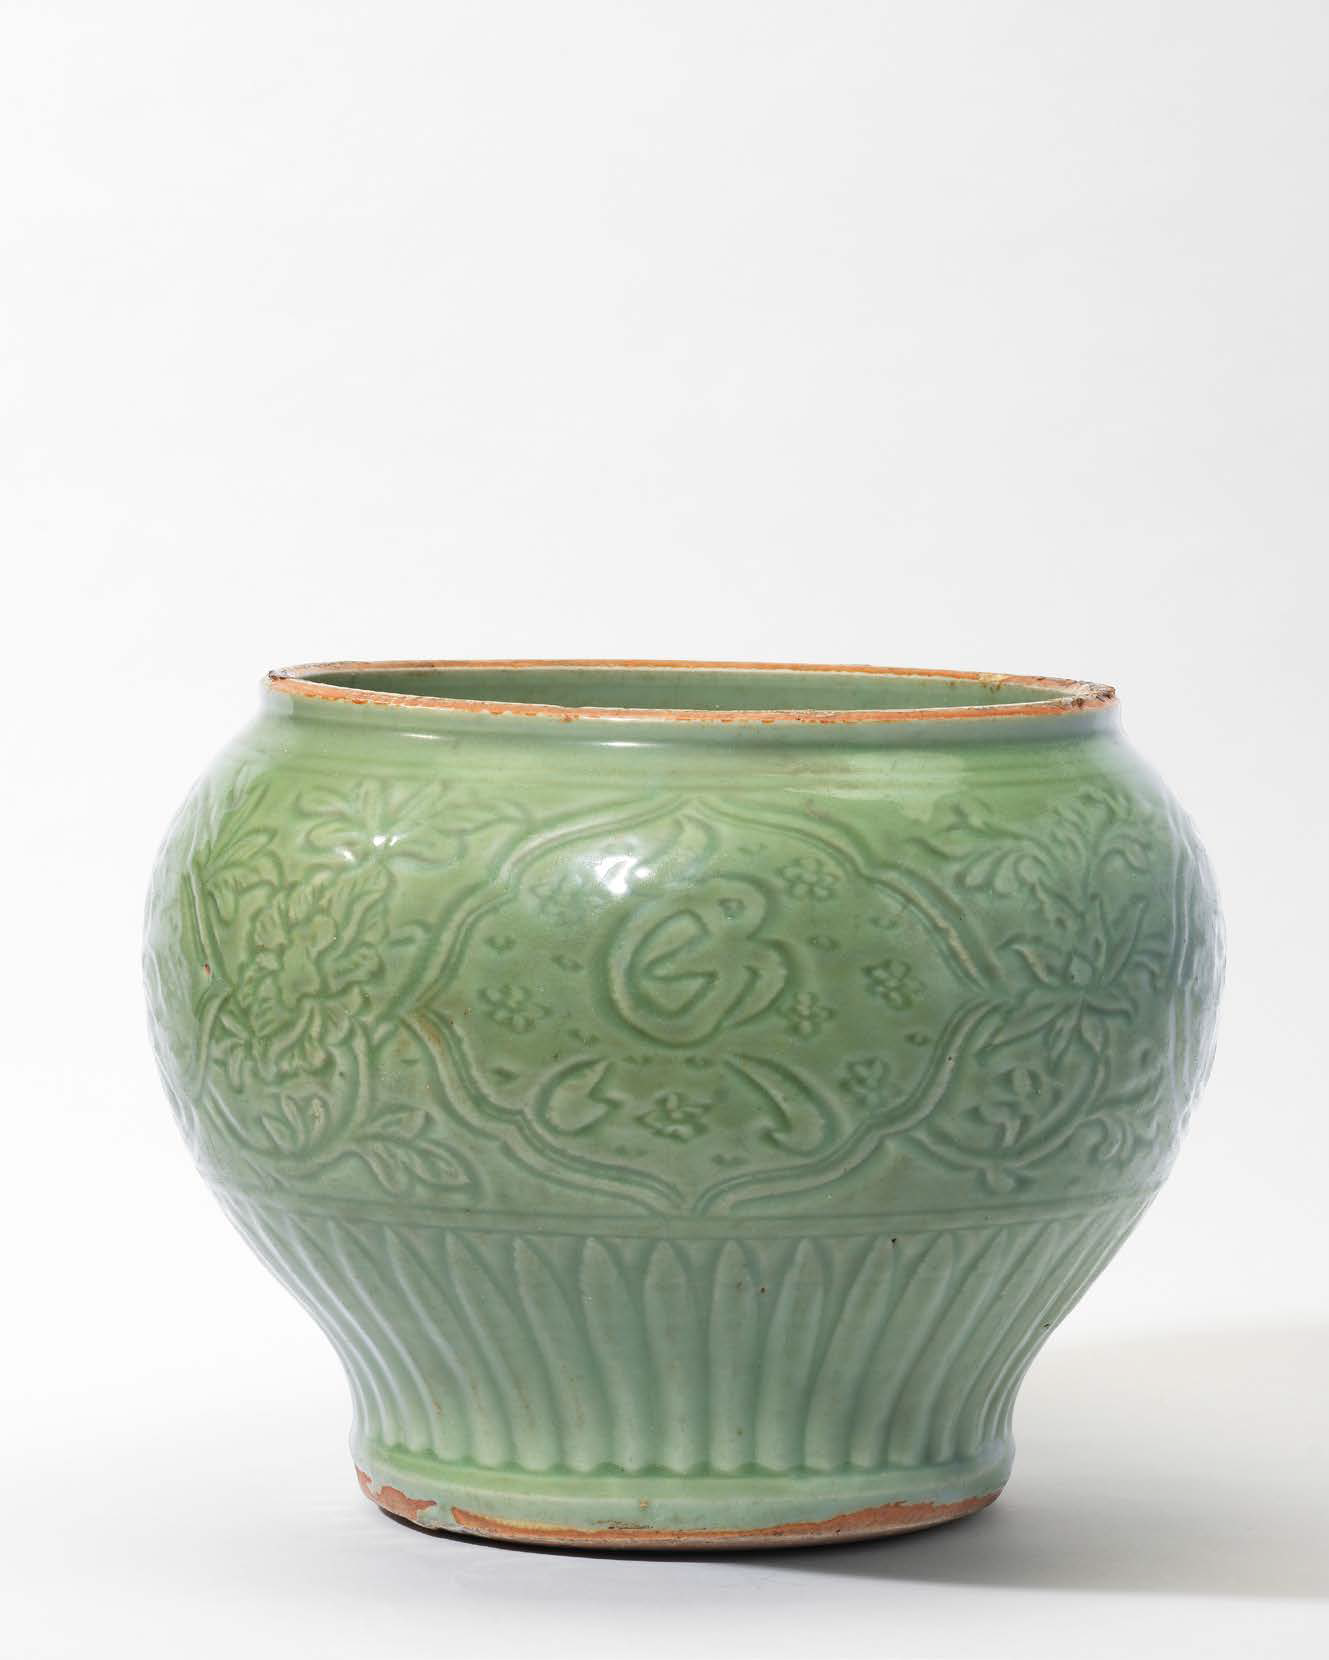 A Longquan celadon incised ‘Characters’ jar, Yuan-early Ming dynasty, 14th century